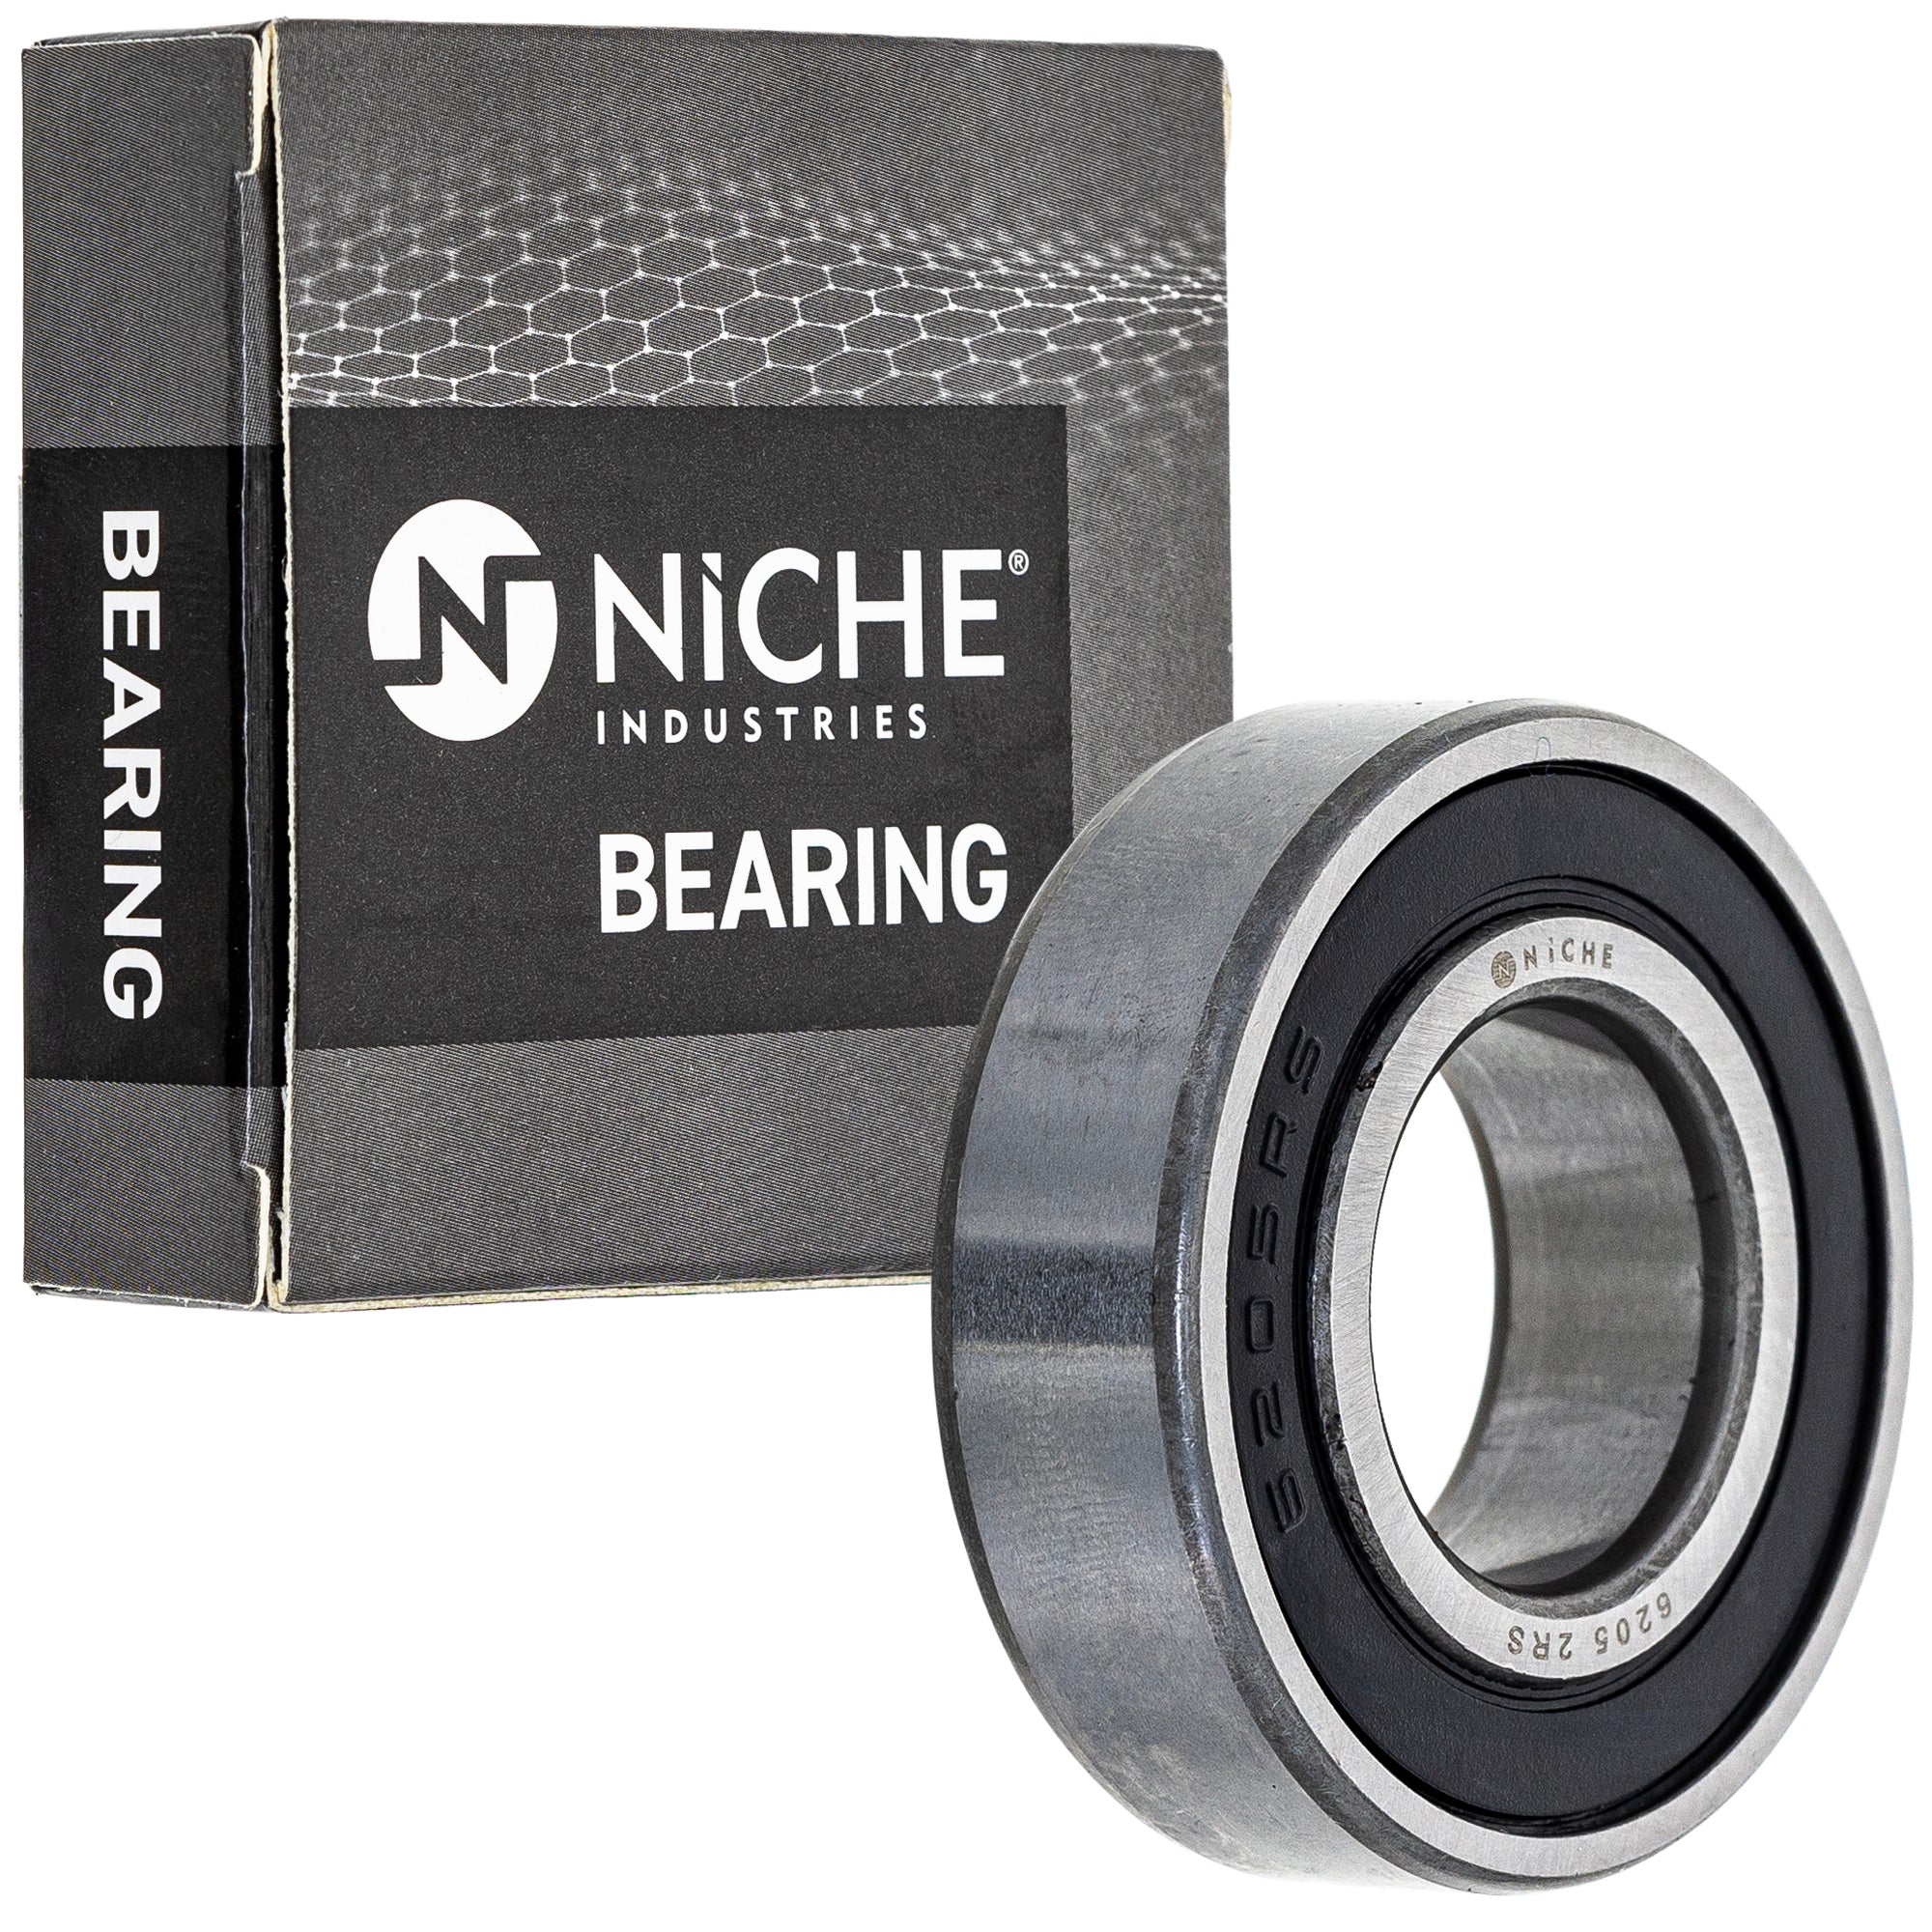 NICHE 519-CBB2228R Bearing 10-Pack for zOTHER Toro Exmark Snapper